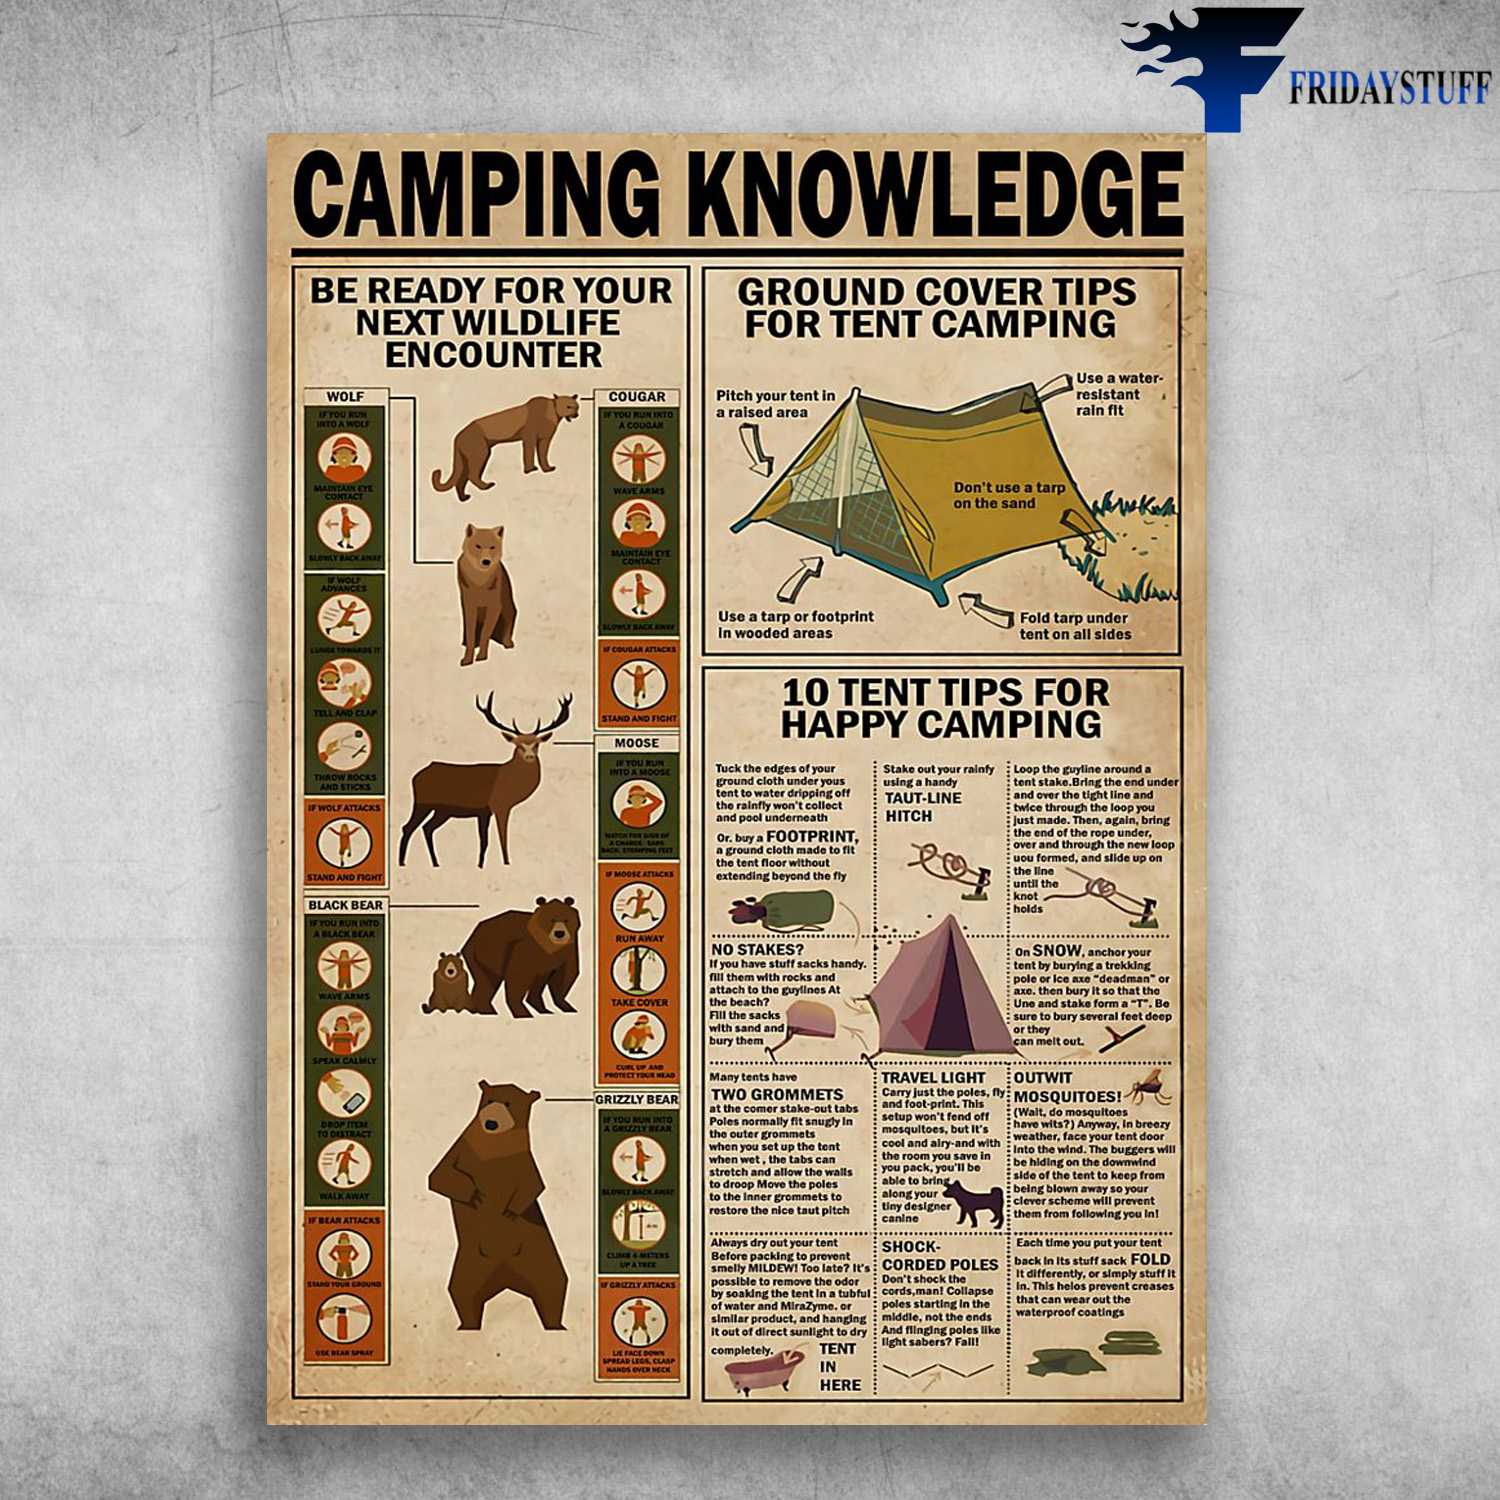 Camping Knowledge - Be Ready For Your Next Wildlife Encounter, Ground Cover Tips For Camping, 10 Tent Tips For Camping